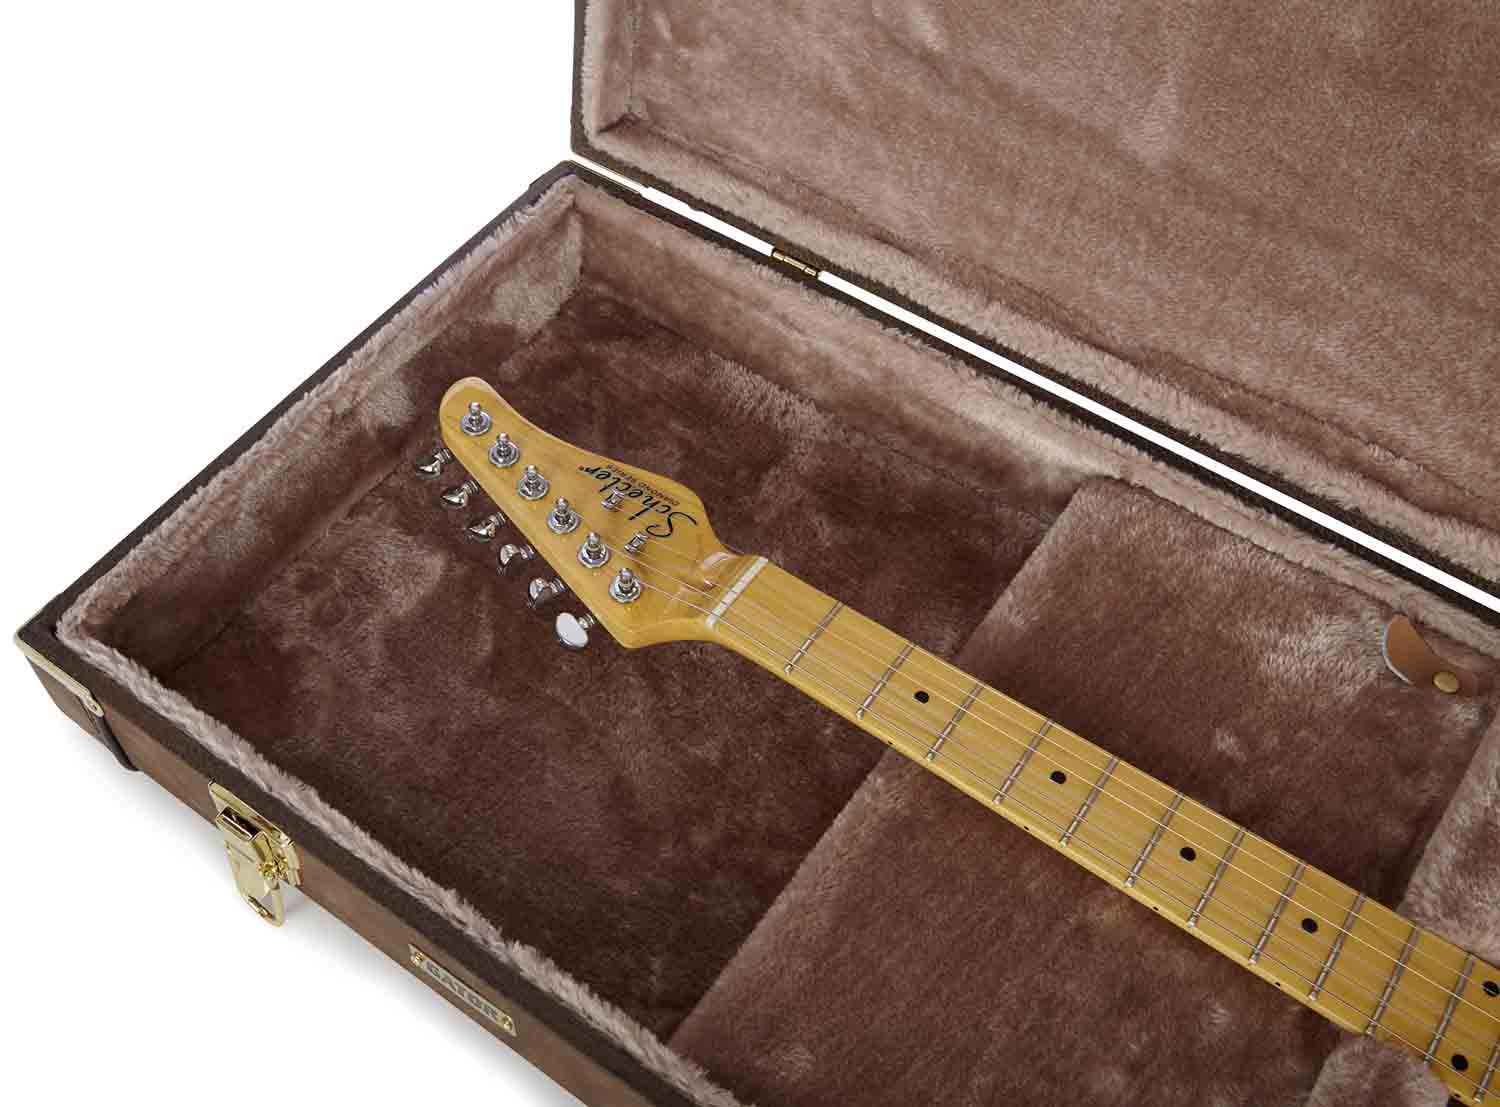 Gator Cases GW-ELECT-VIN Deluxe Wood Case for Electric Guitars  - Vintage Brown - Hollywood DJ